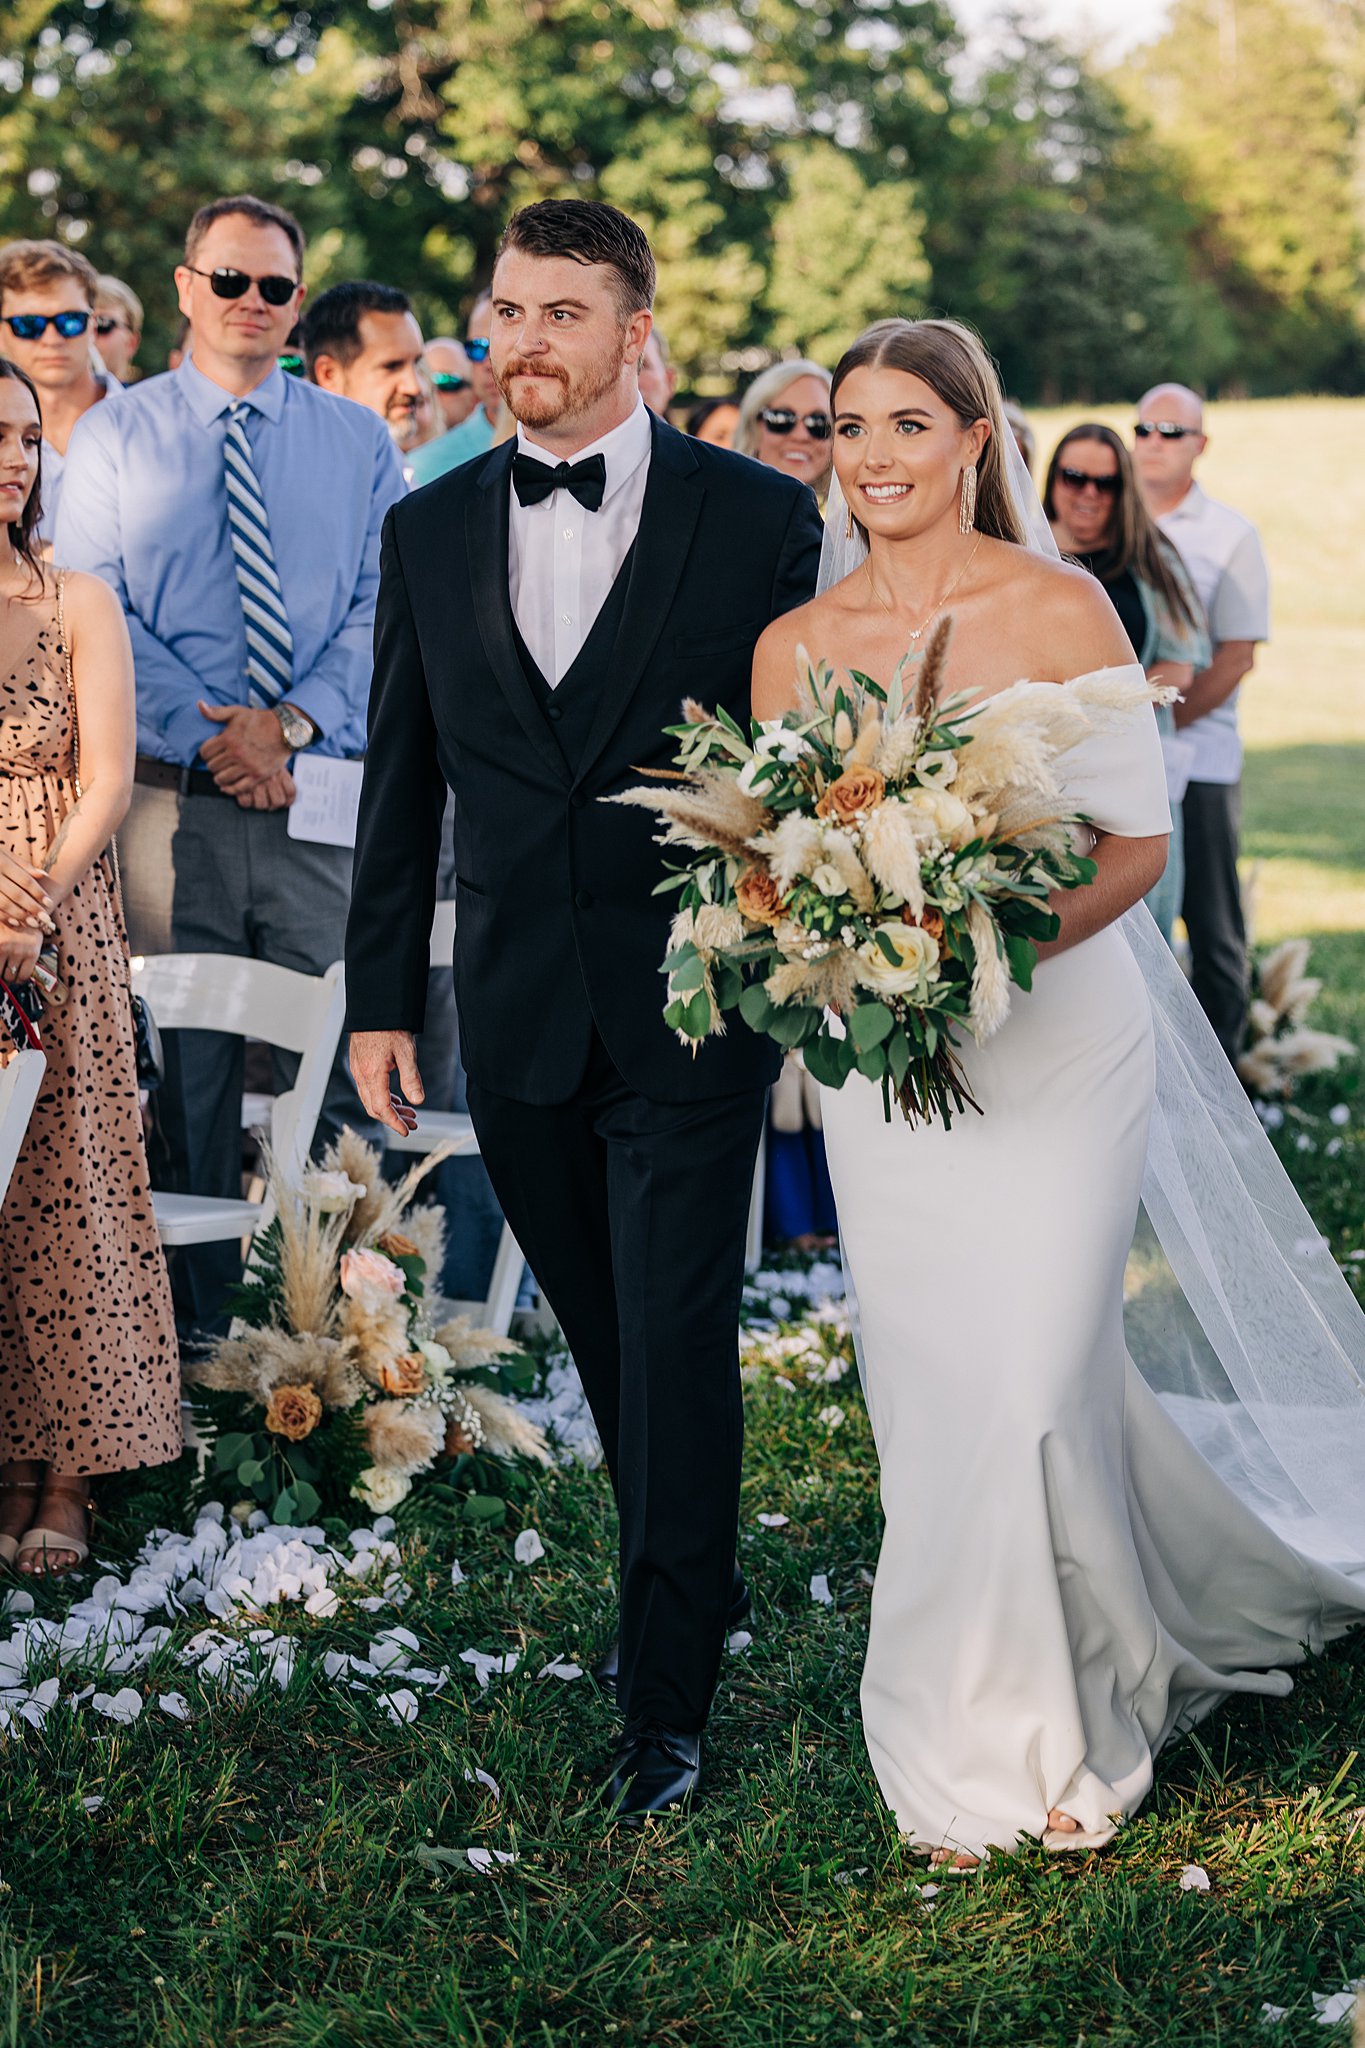 A man walks his sister down the aisle of her Summerfield Farms wedding